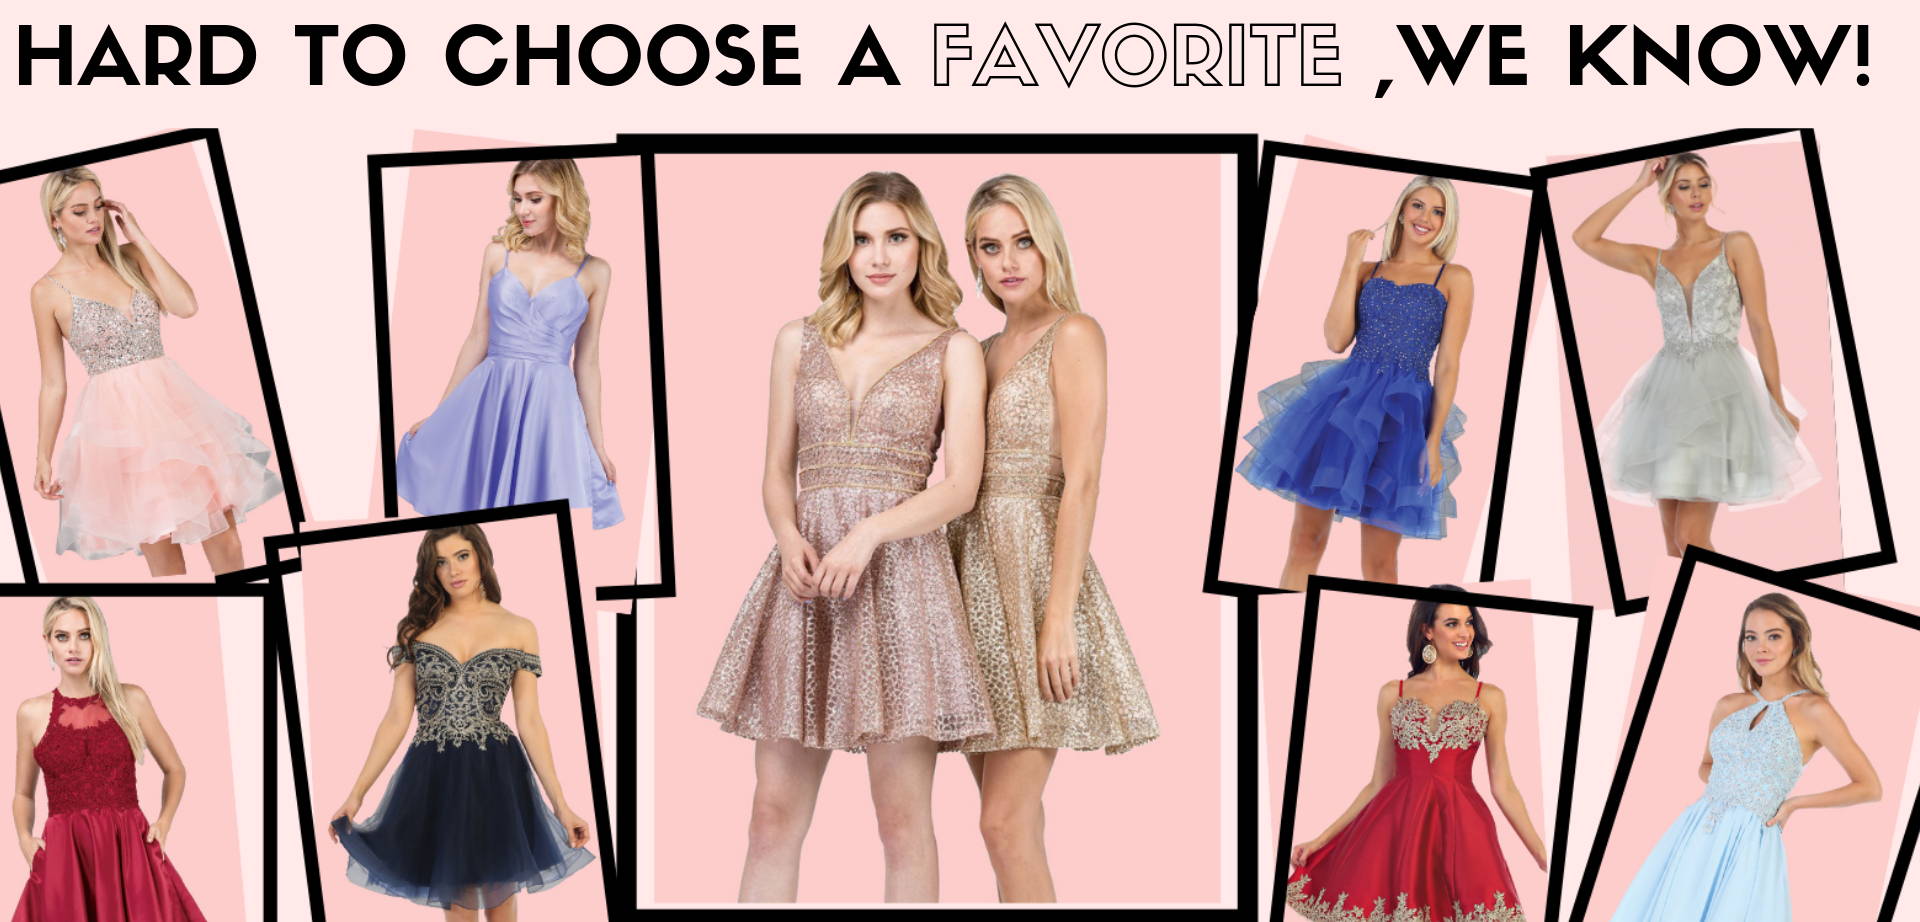 MarlasFashions.com carries a huge selection of grade 8 grad dresses.  These grade 8 graduation dresses are available in plus sizes, simple grad dresses, short and puffy grade 8 grad dresses, pink grade 8 grad dresses, 8th grade dresses that look amazing on everyone.